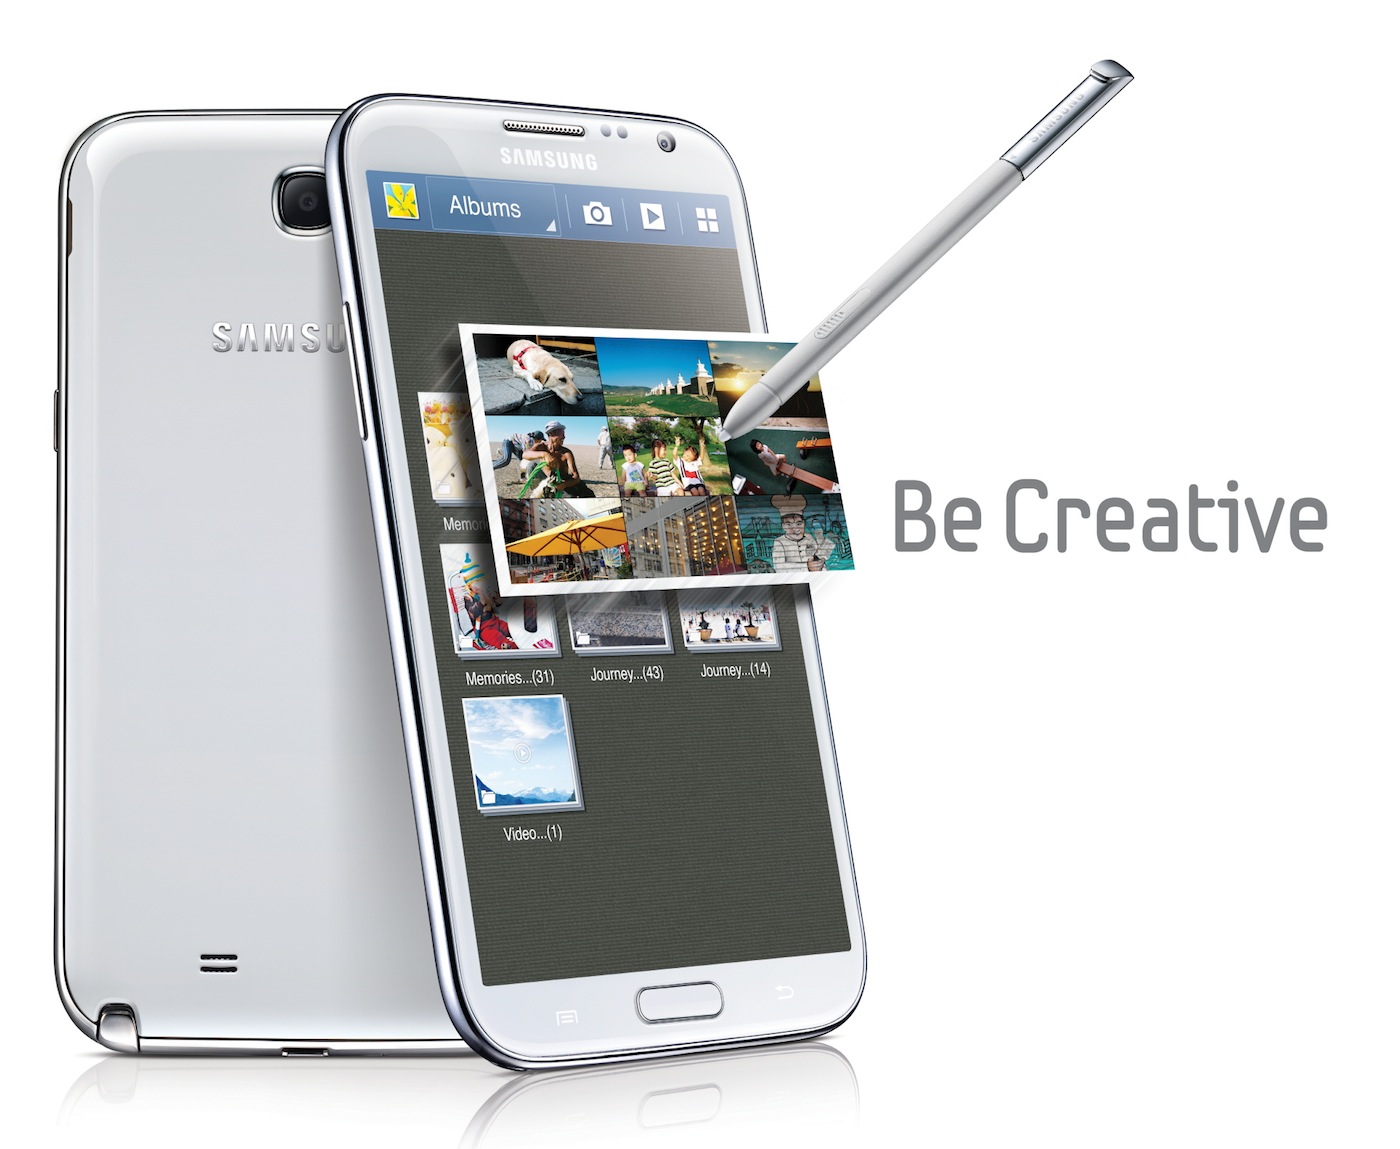 Samsung Galaxy Note N7100 Wallpaper Graphic And Vector